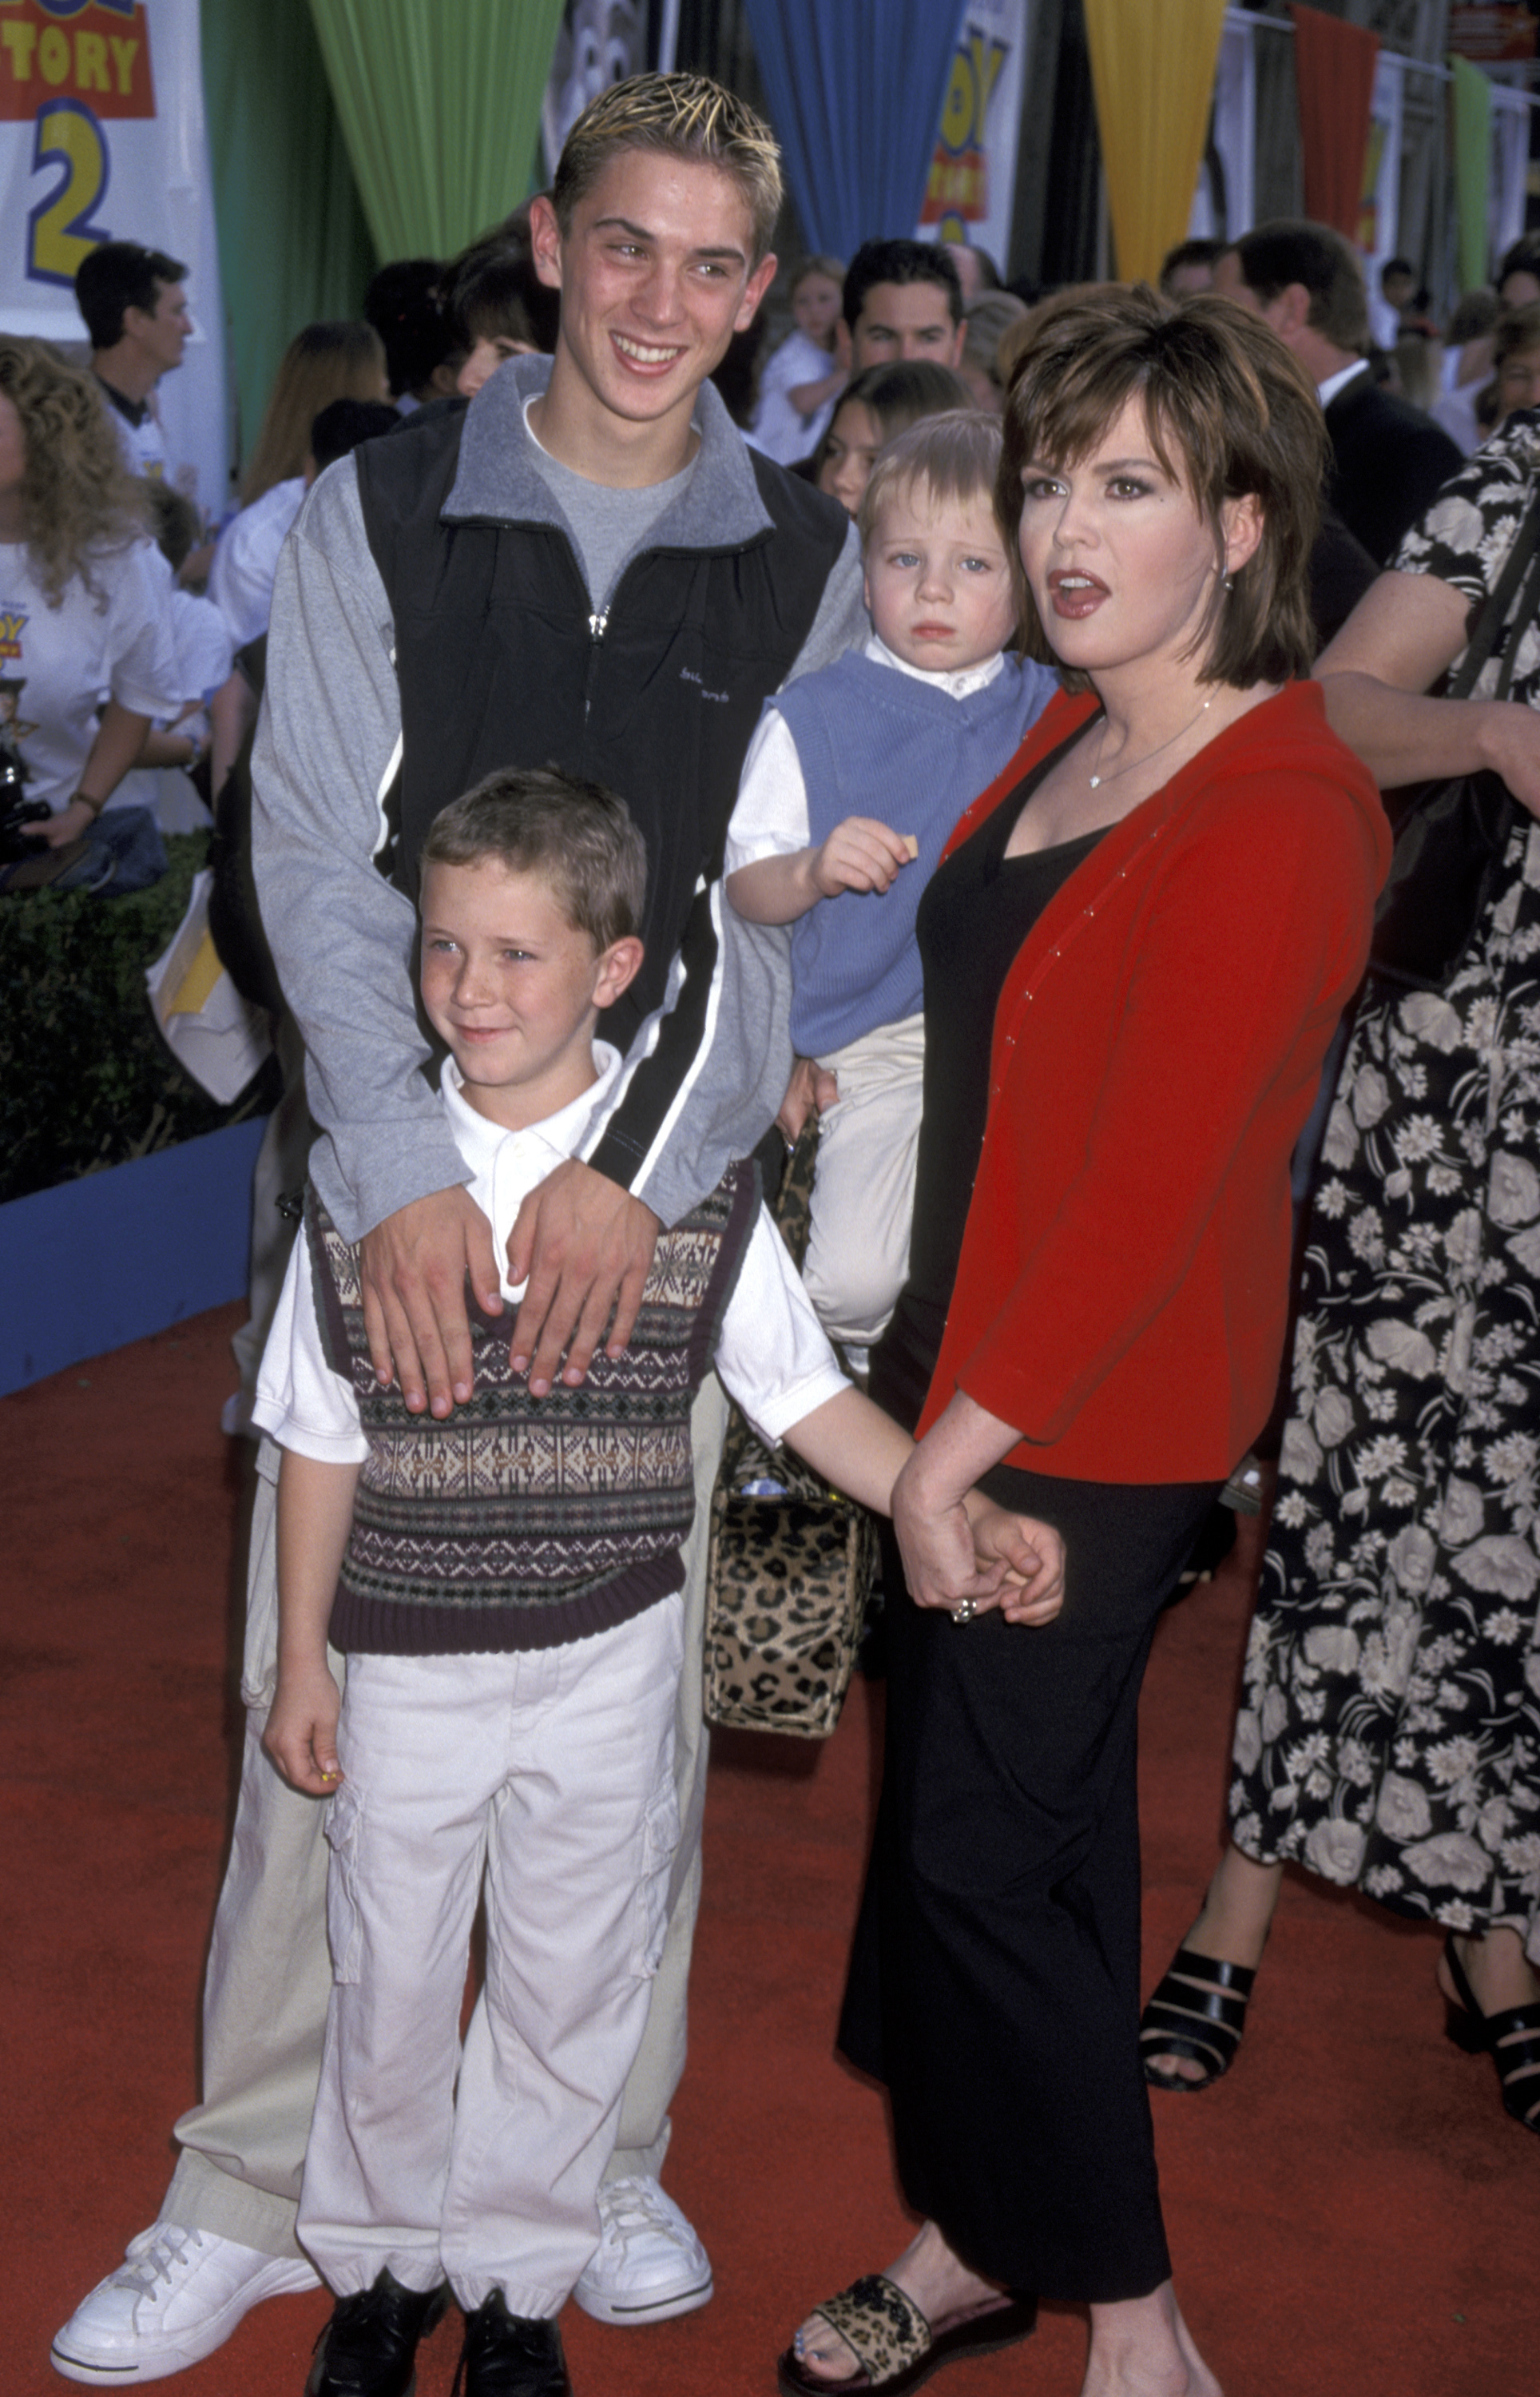 Marie Osmond and sons Stephen, Michael, and Brandon at the "Toy Story 2" premiere on November 13, 1999. | Source: Getty Images